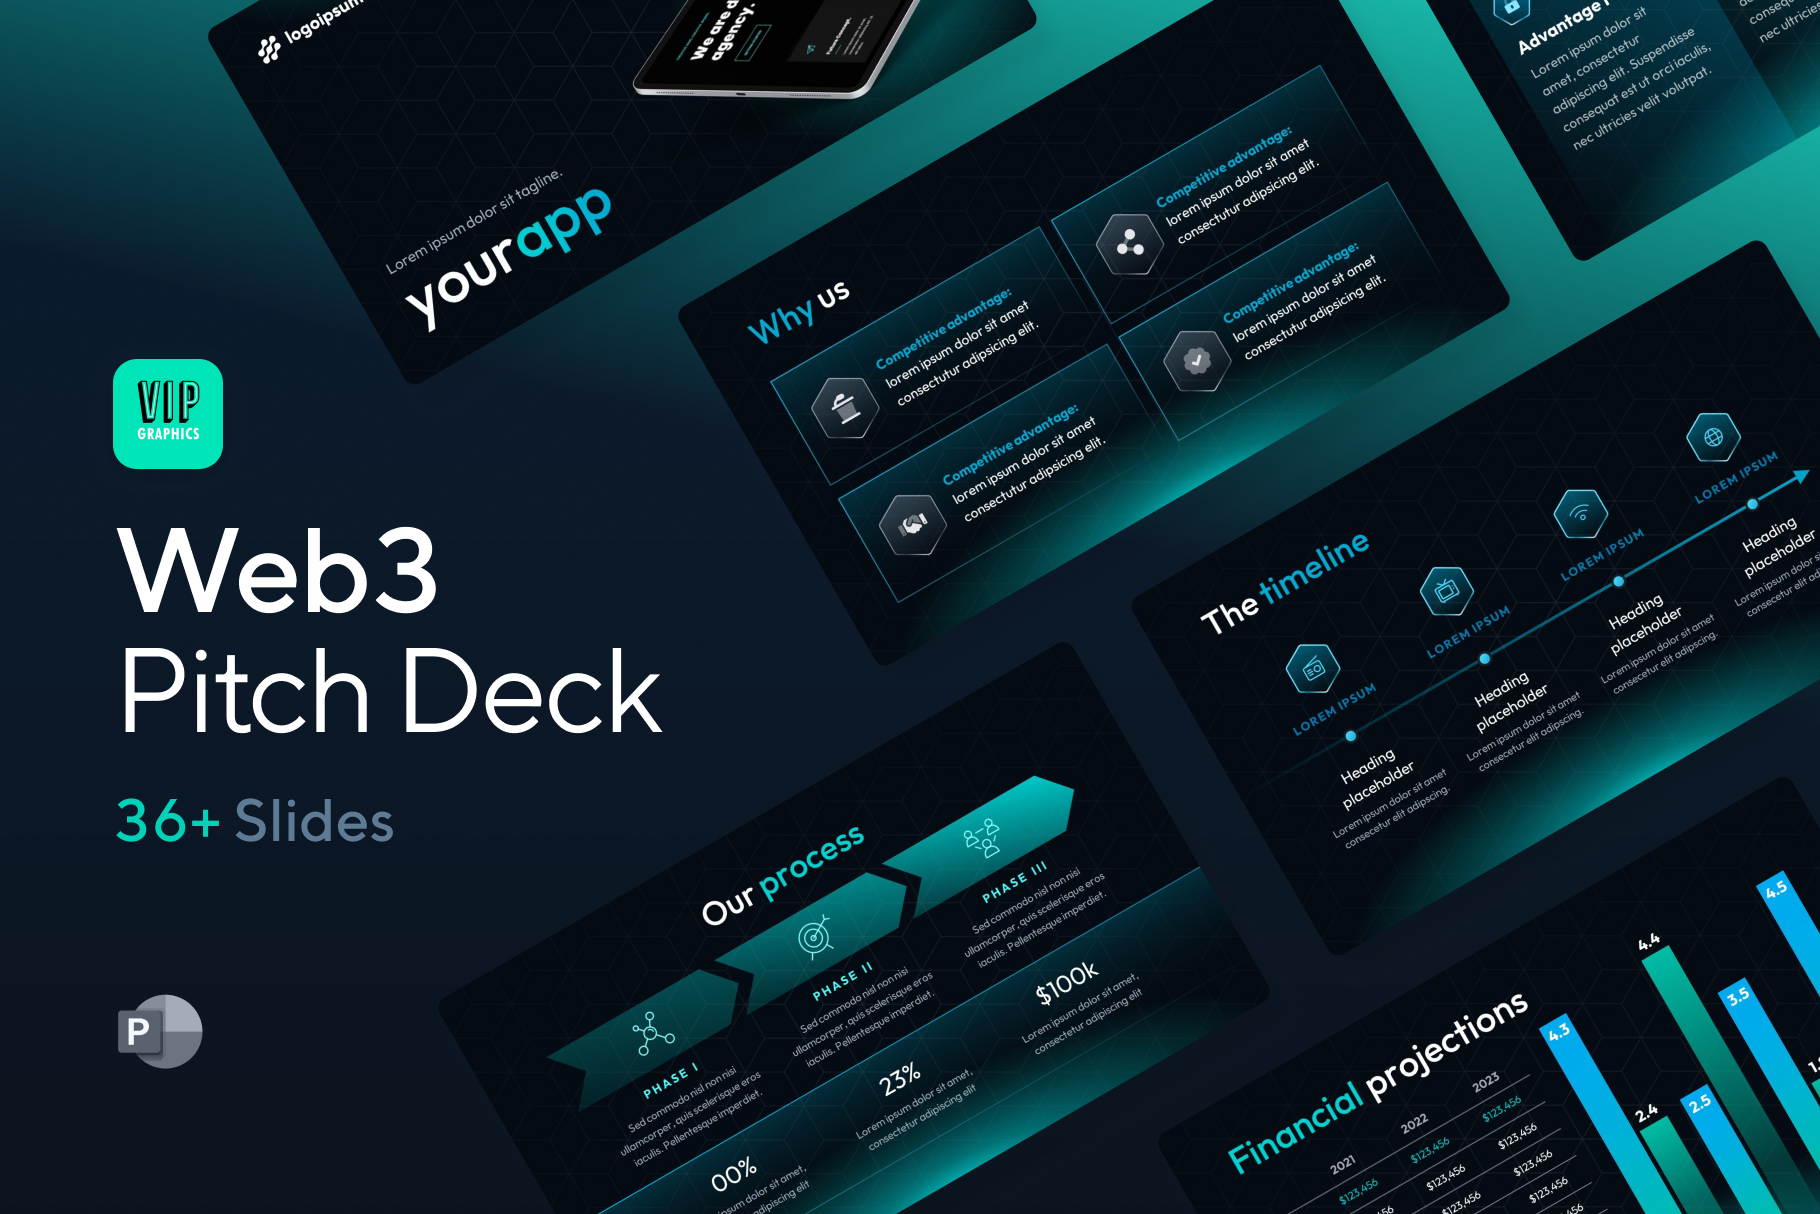 Web3 Pitch Deck Template - Investor Presentation for Web 3.0 startups | VIP Graphics